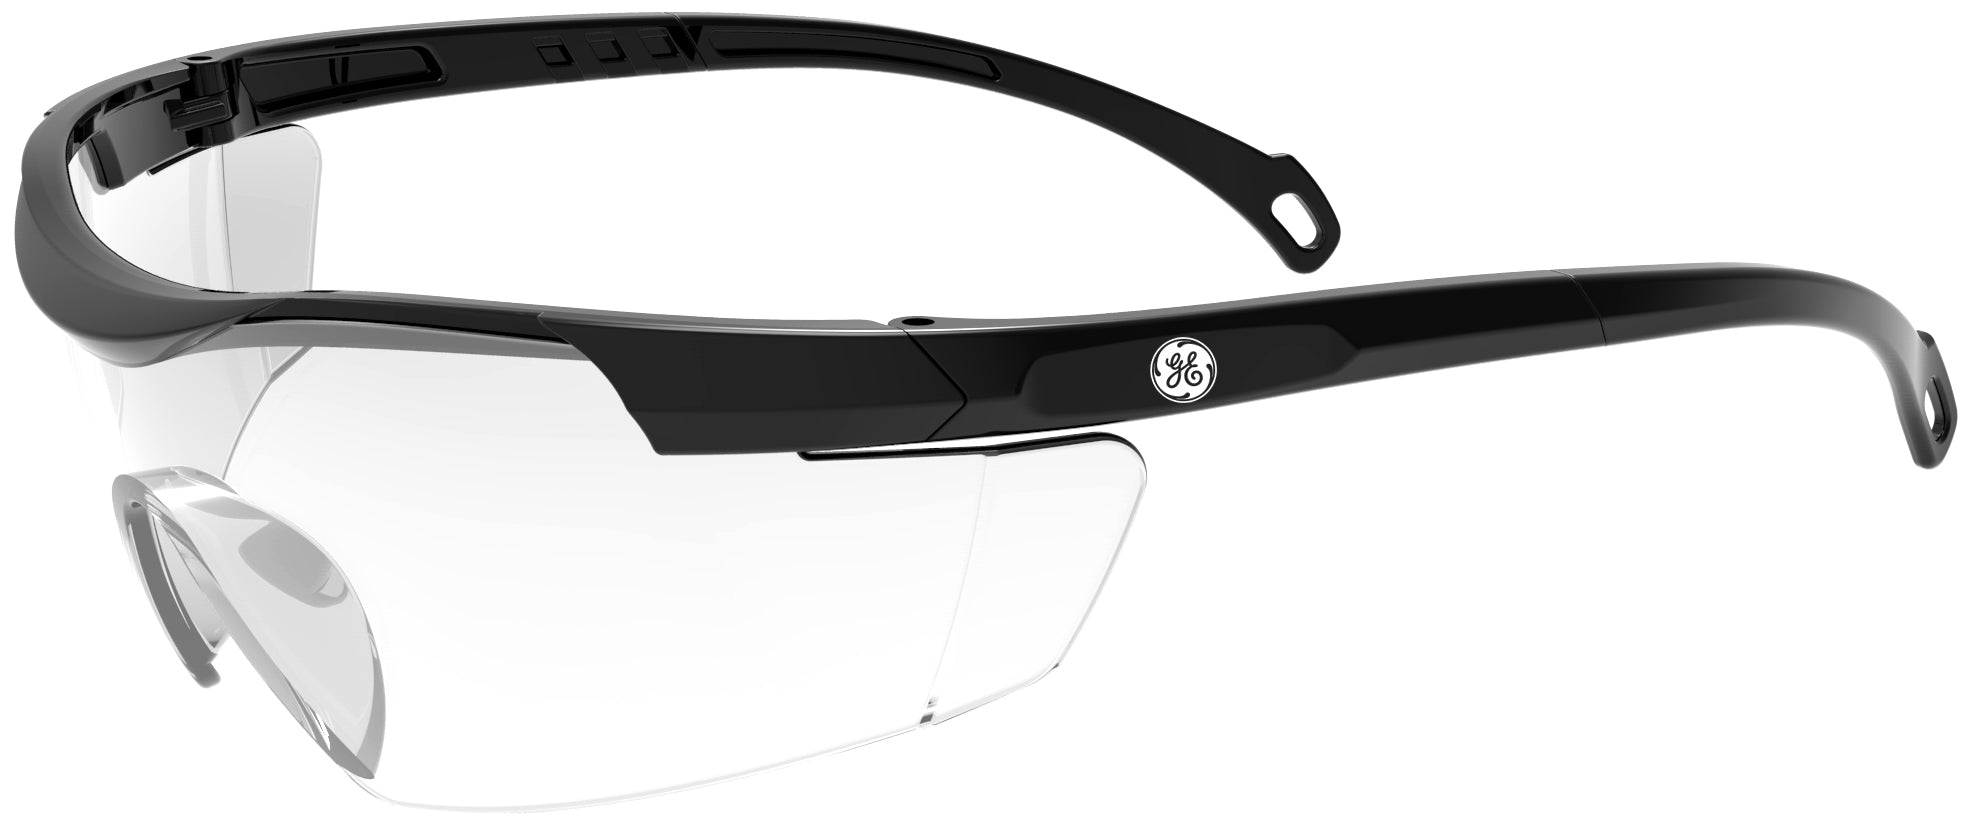 GE PPE - PROTECTIVE EYEWEAR - 01 Series Safety Glasses - #201C Clear or Smoke Lens